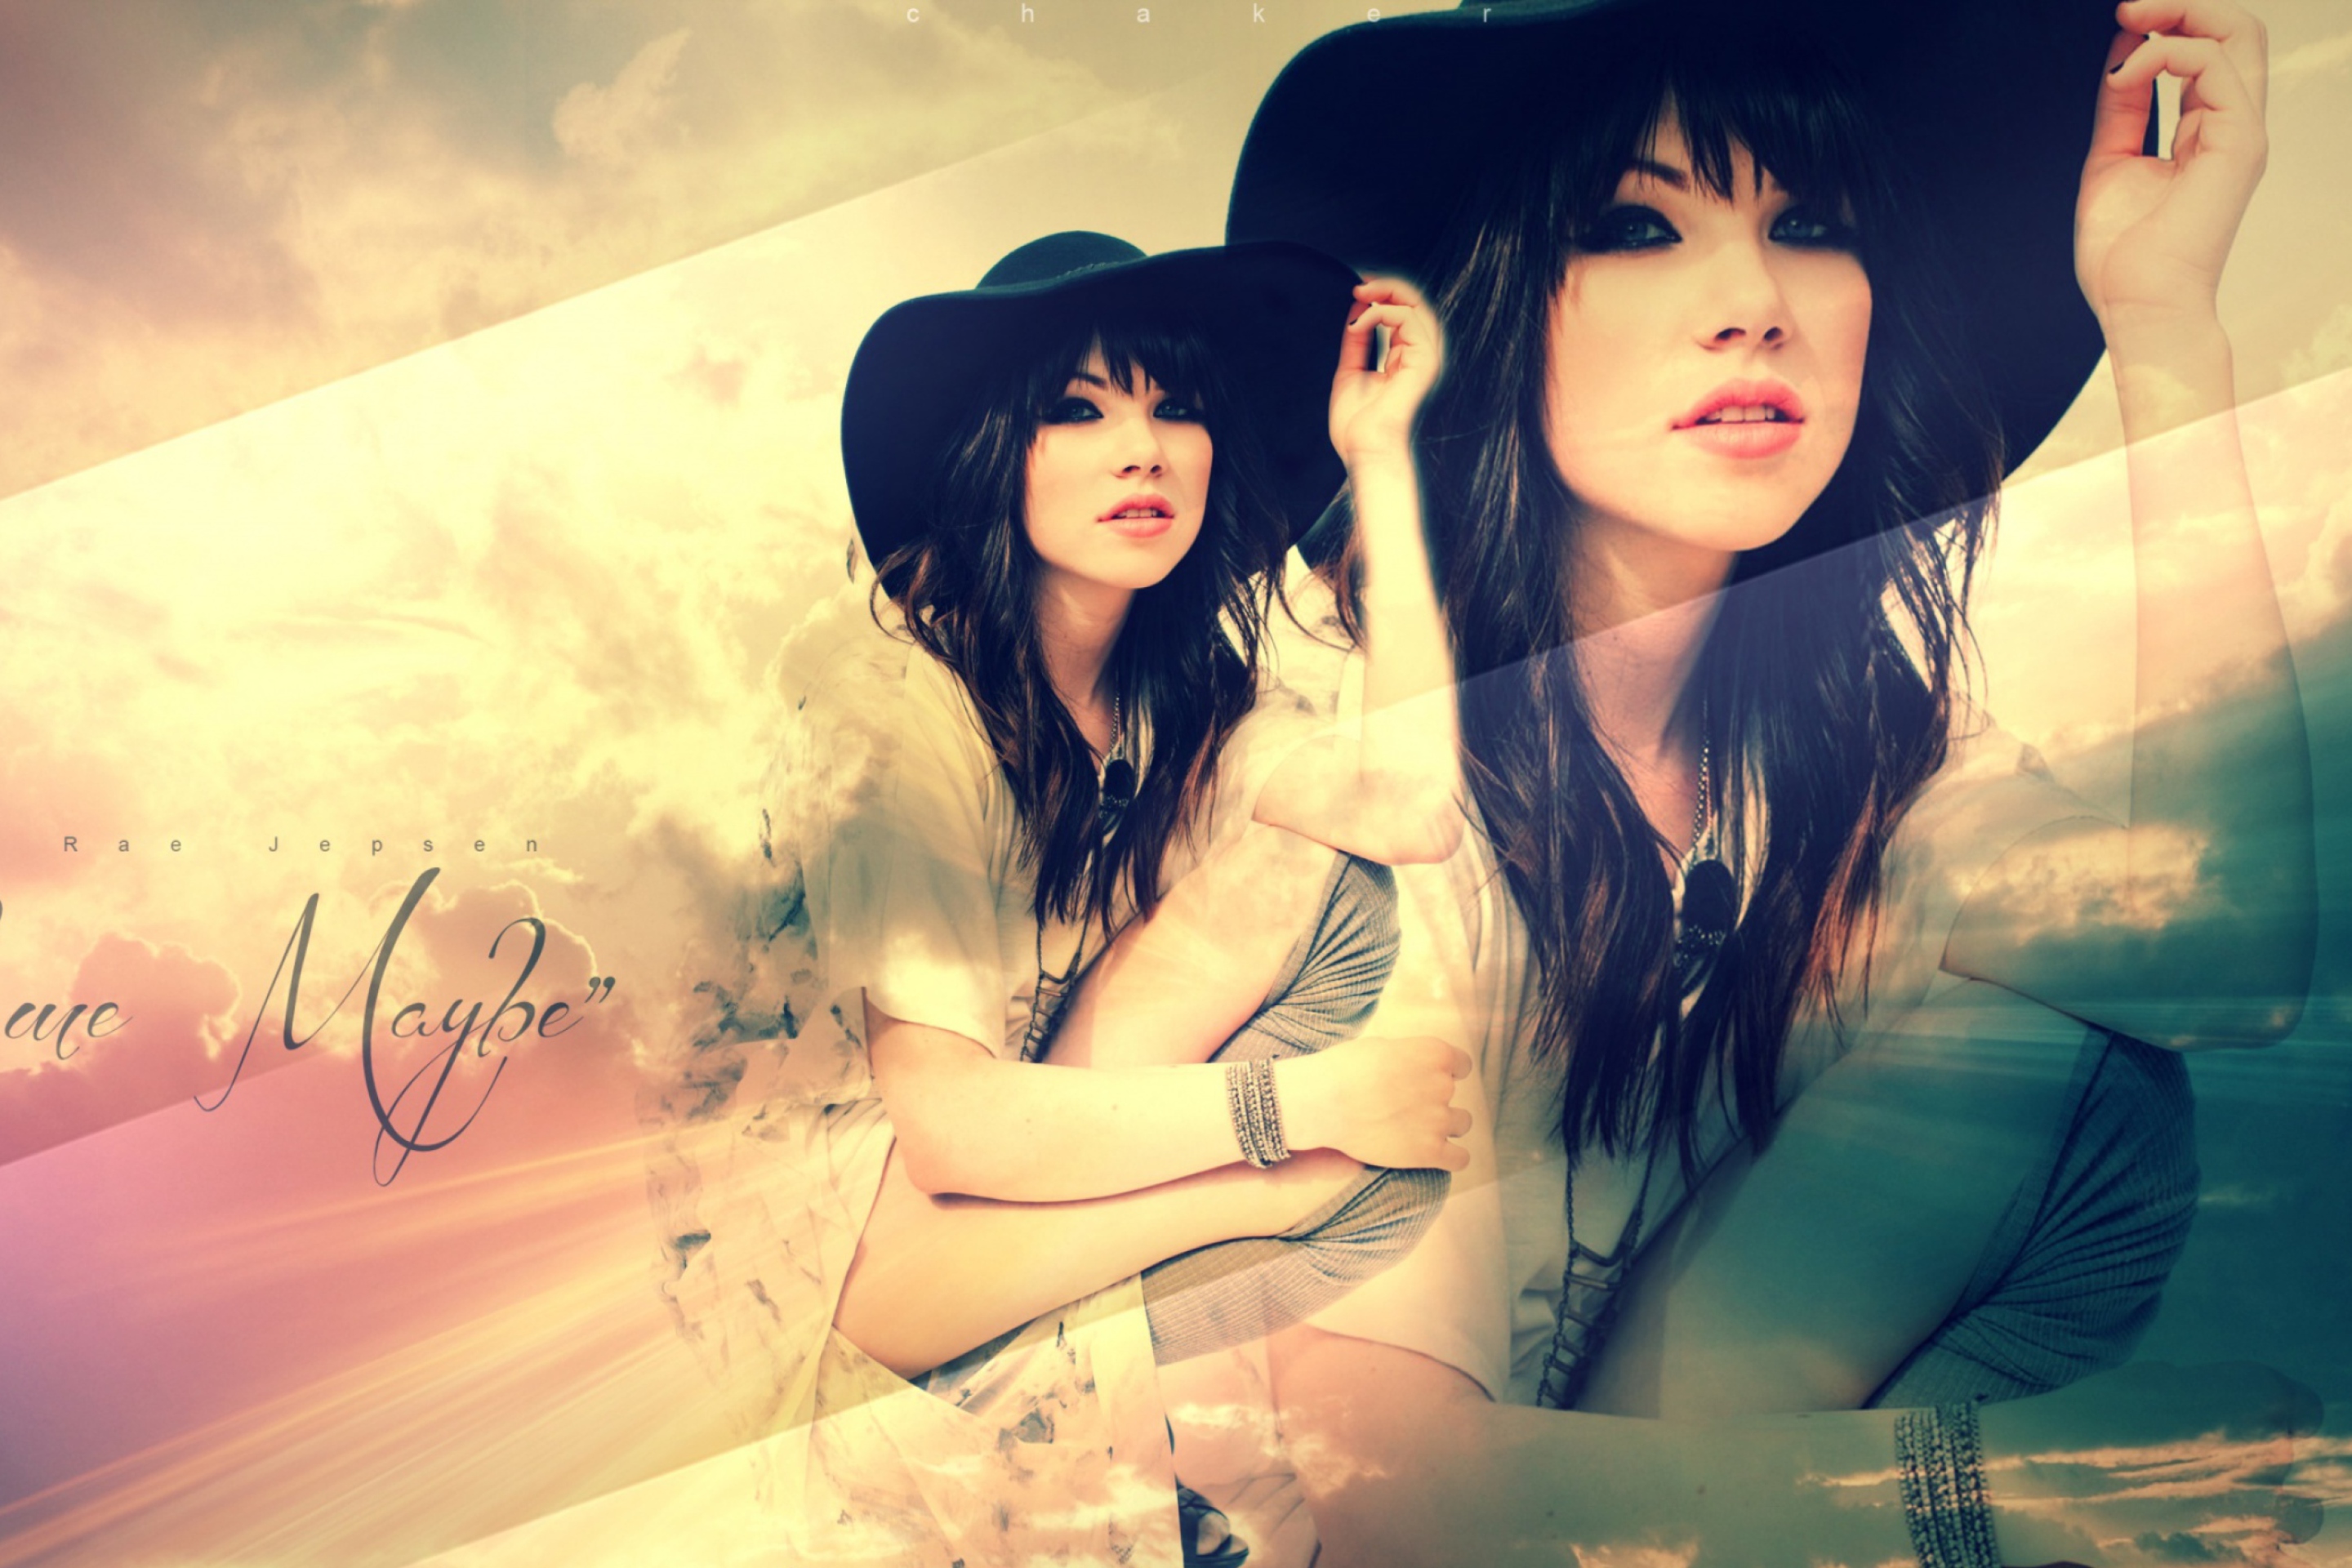 Carly Rae Jepsen - Call Me Maybe wallpaper 2880x1920